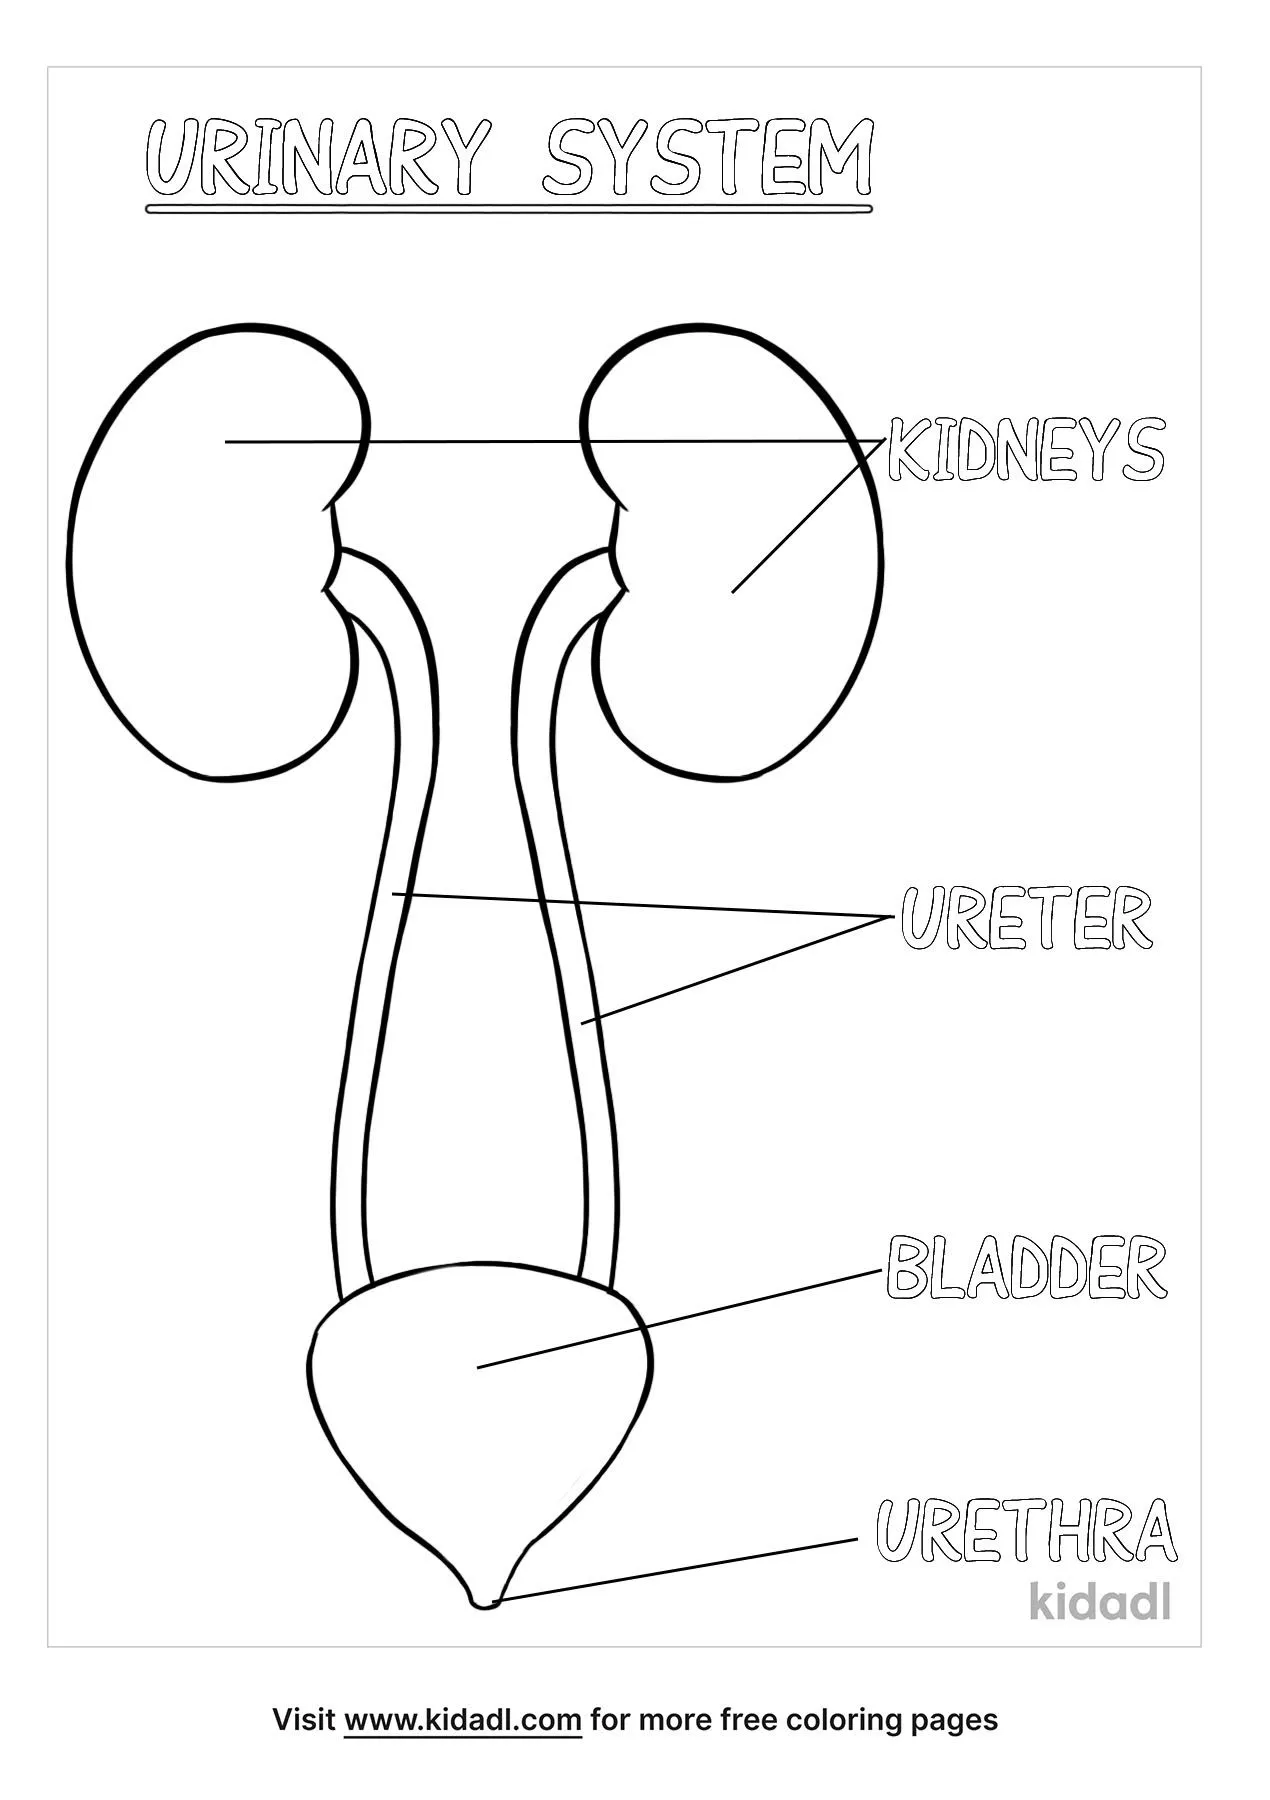 Free urinary system coloring page coloring page printables